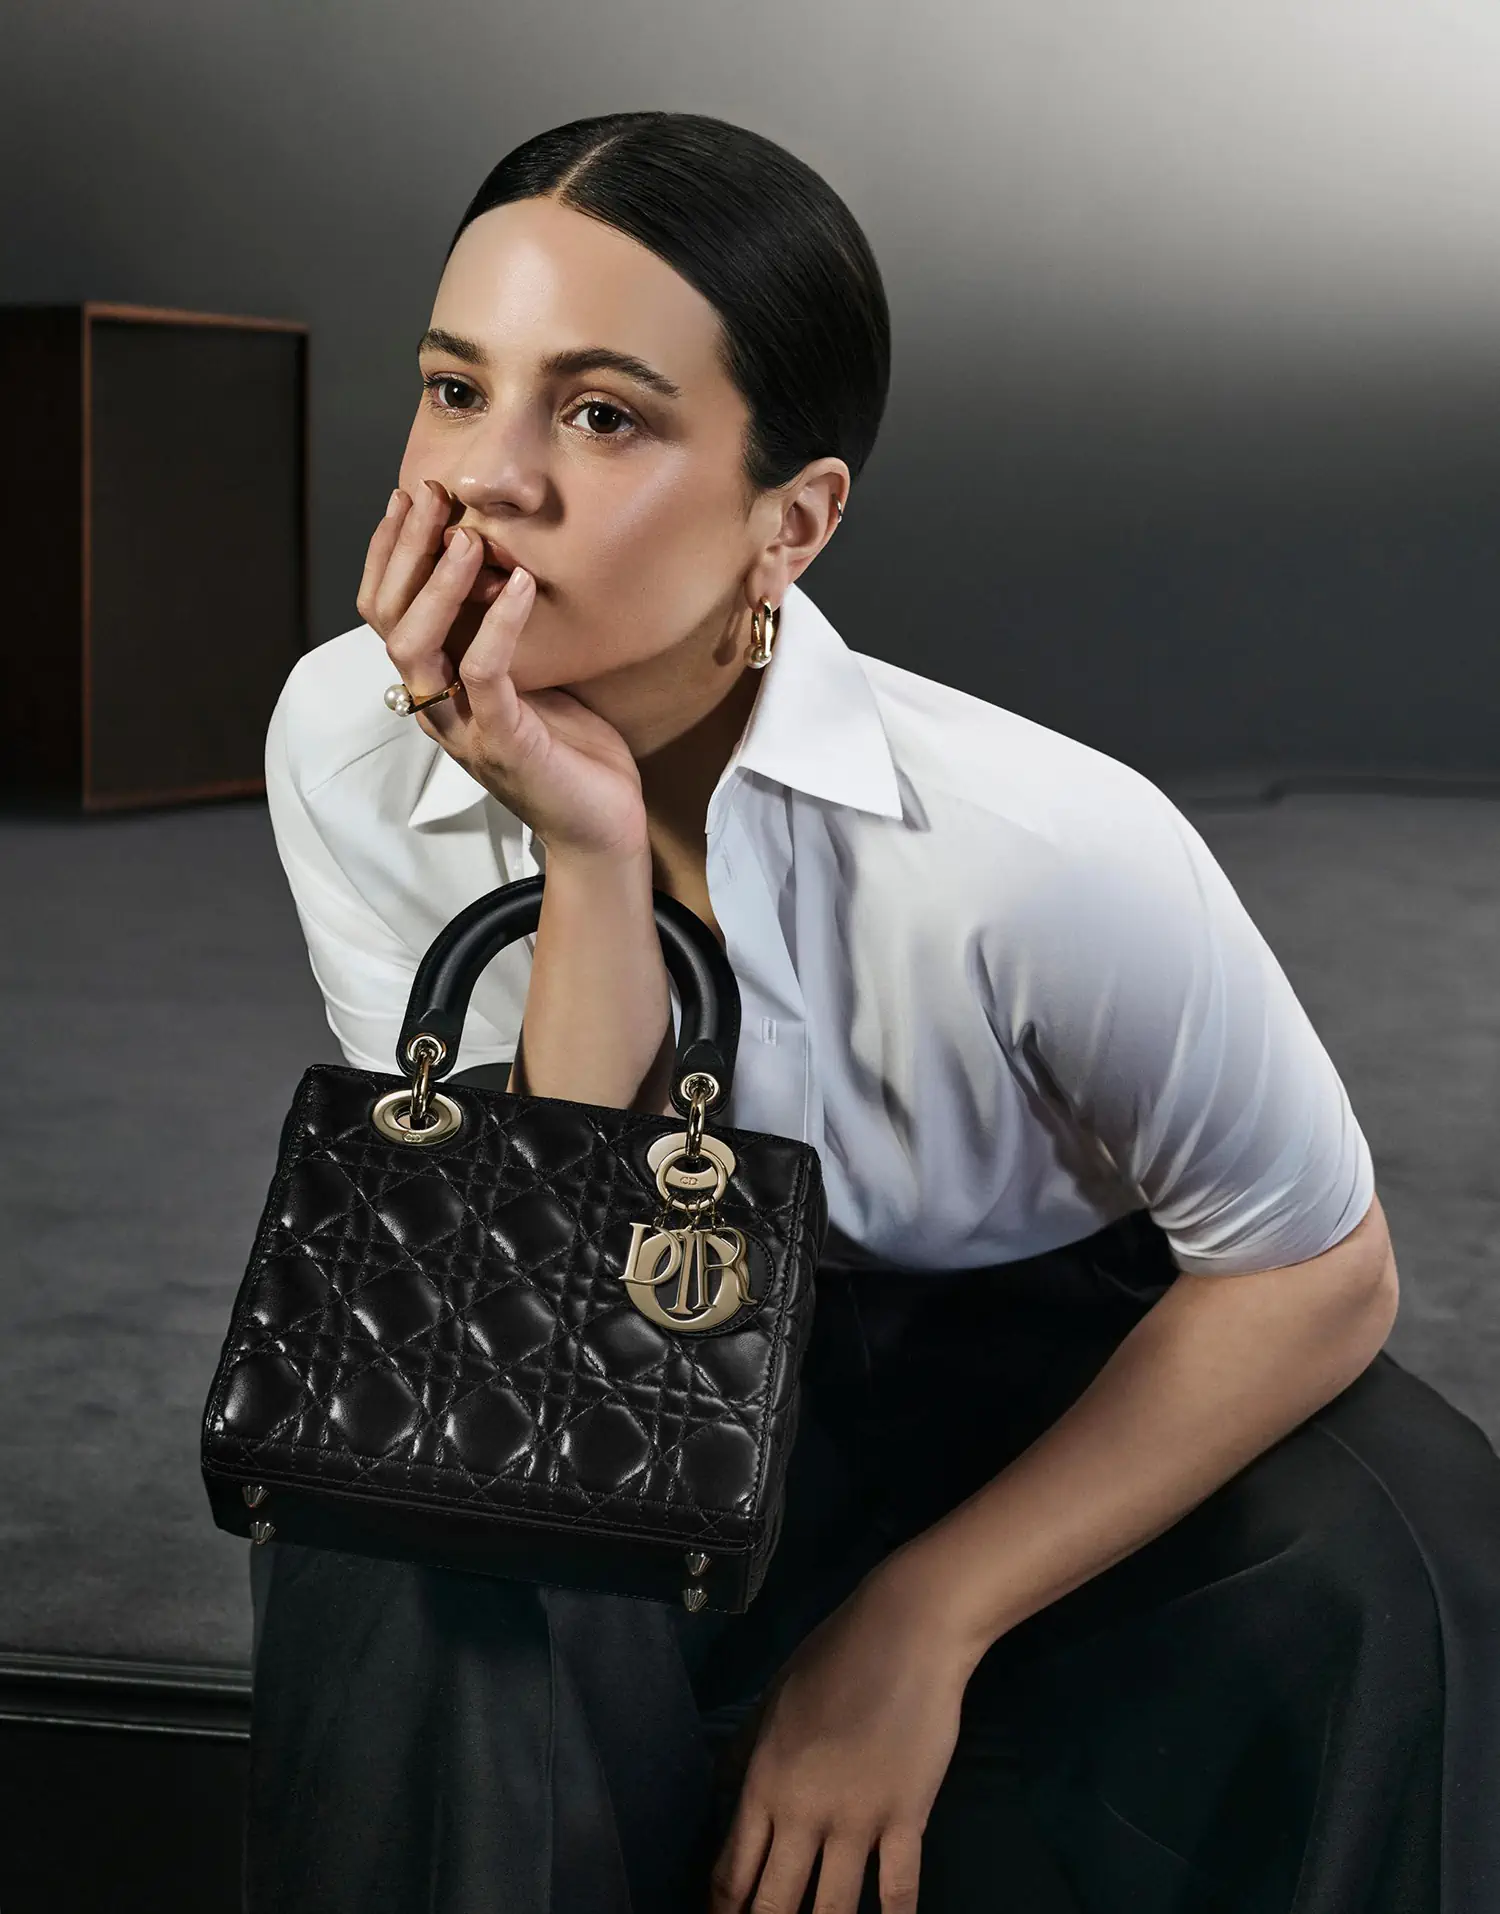 Rosalía shines as Dior's global ambassador in the Lady Dior campaign